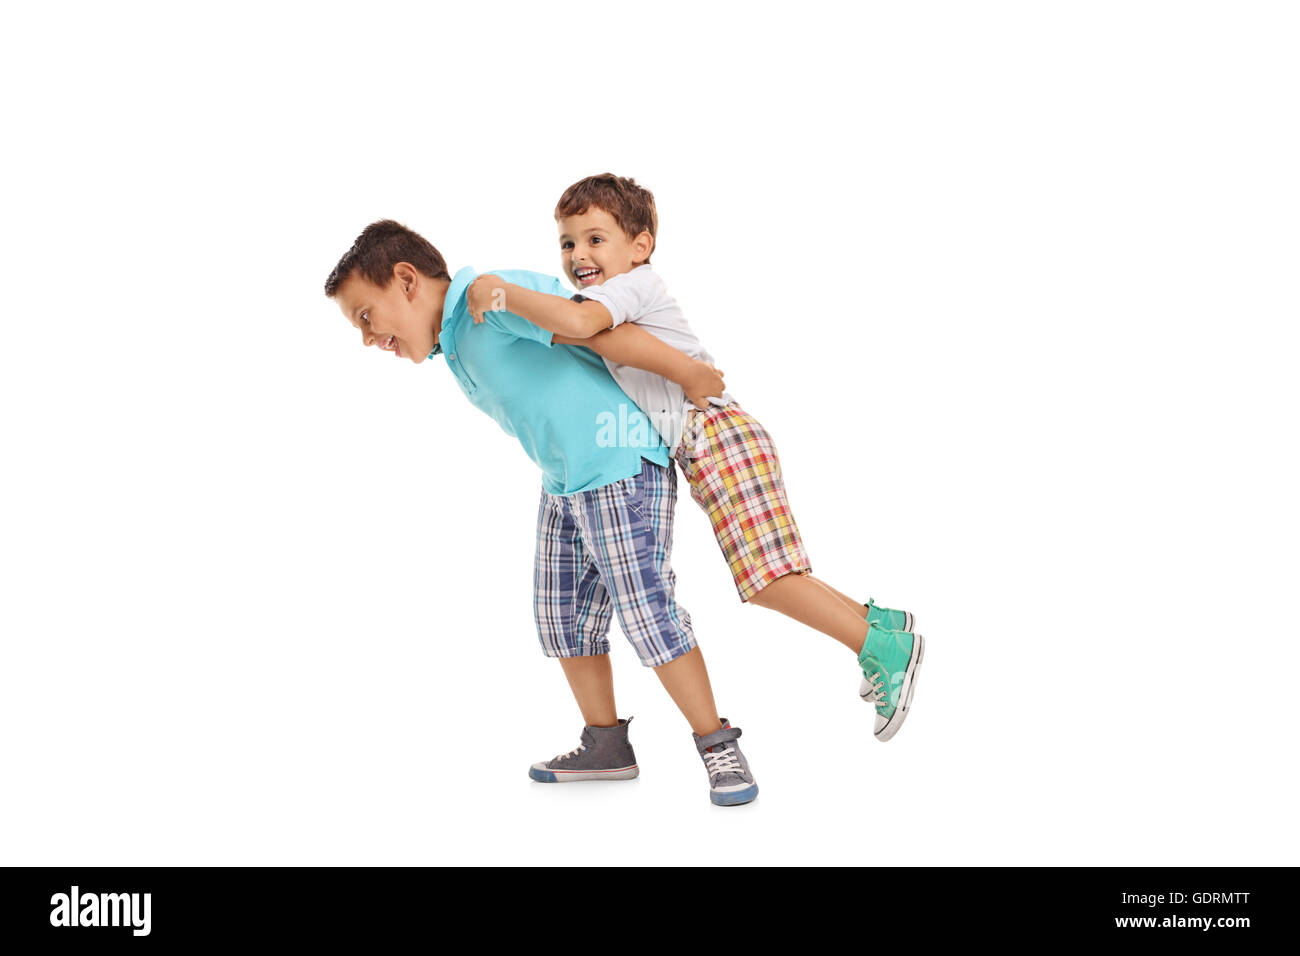 Two children playing with each other isolated on white background Stock Photo